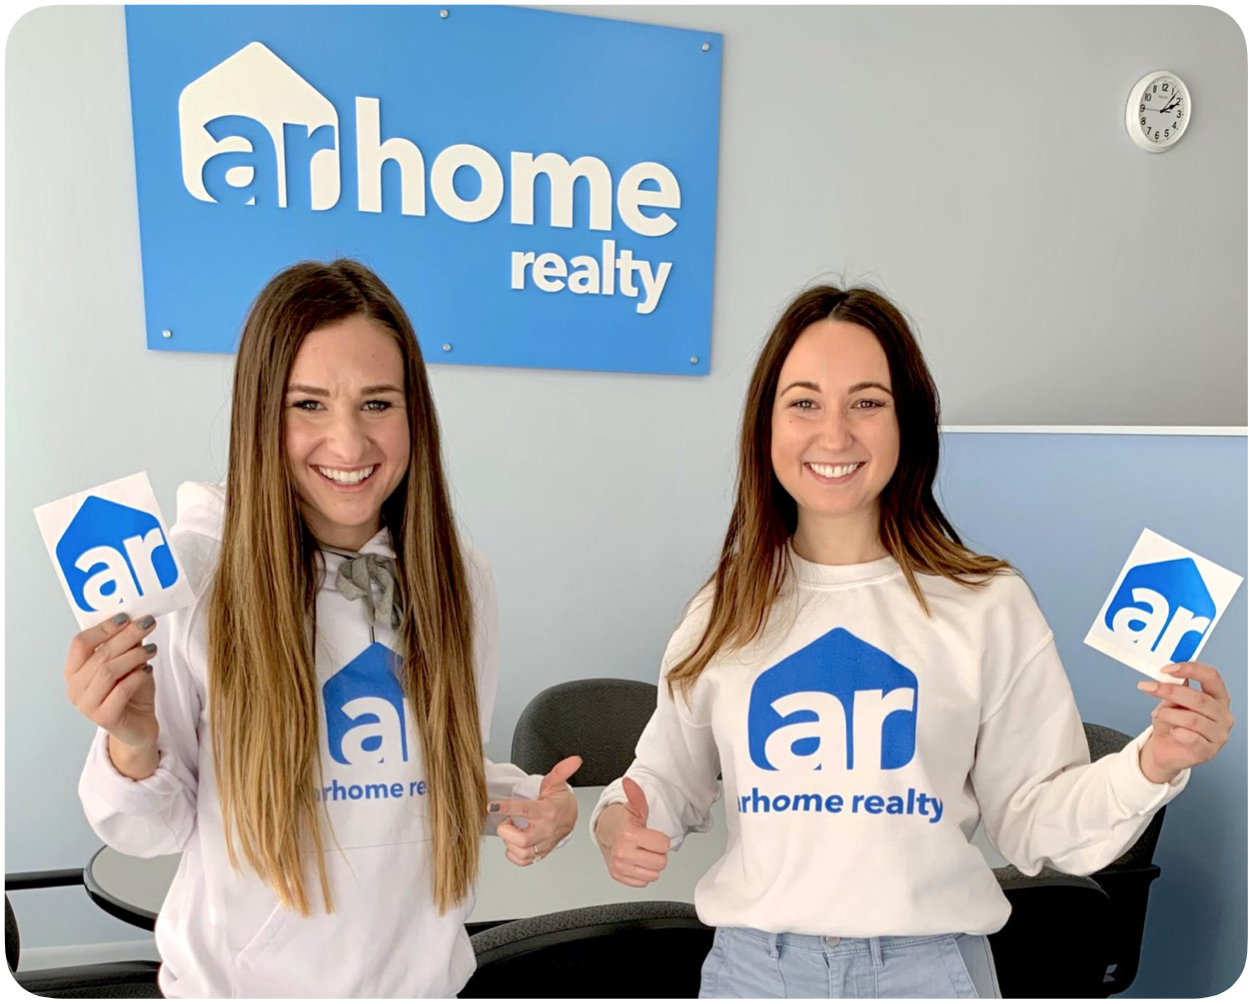 two people standing in ar logo sweaters holding ar logo stickers; linking to why arhome